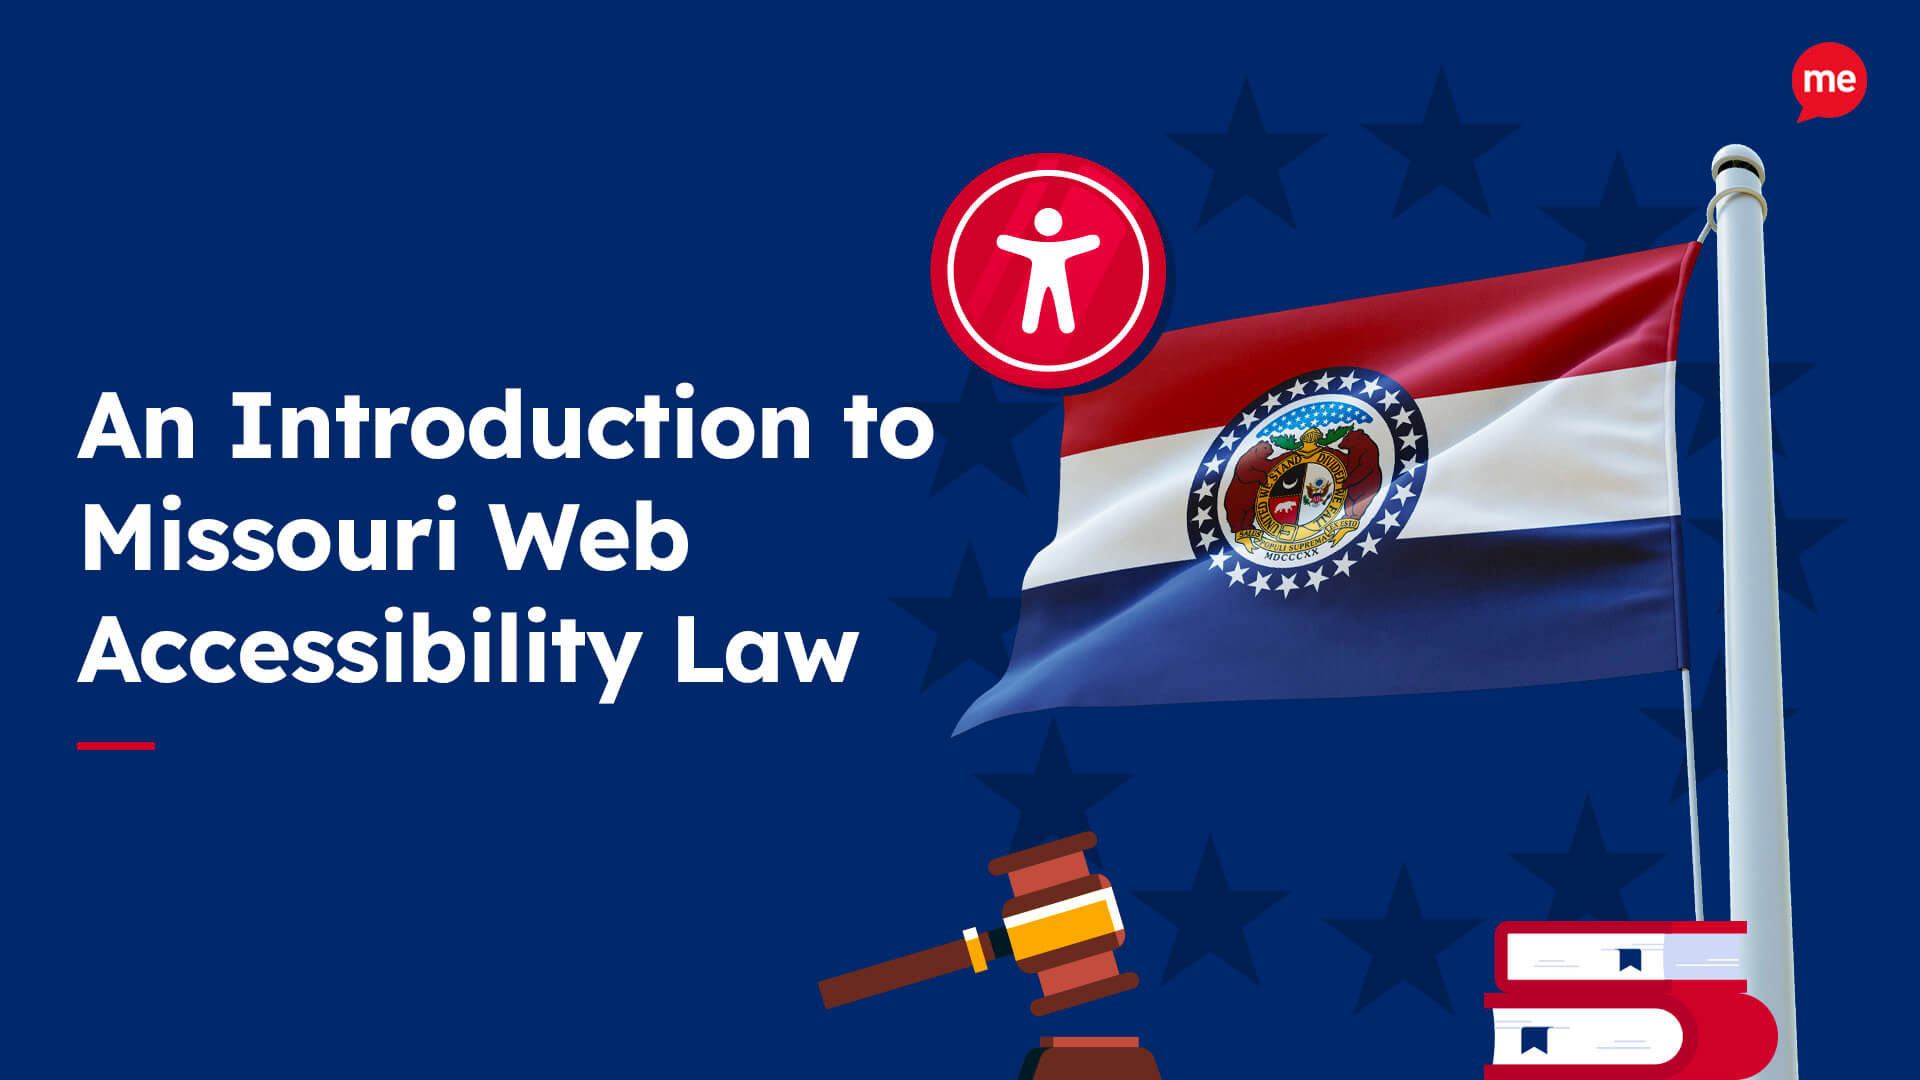 An Introduction to Missouri Web Accessibility Law